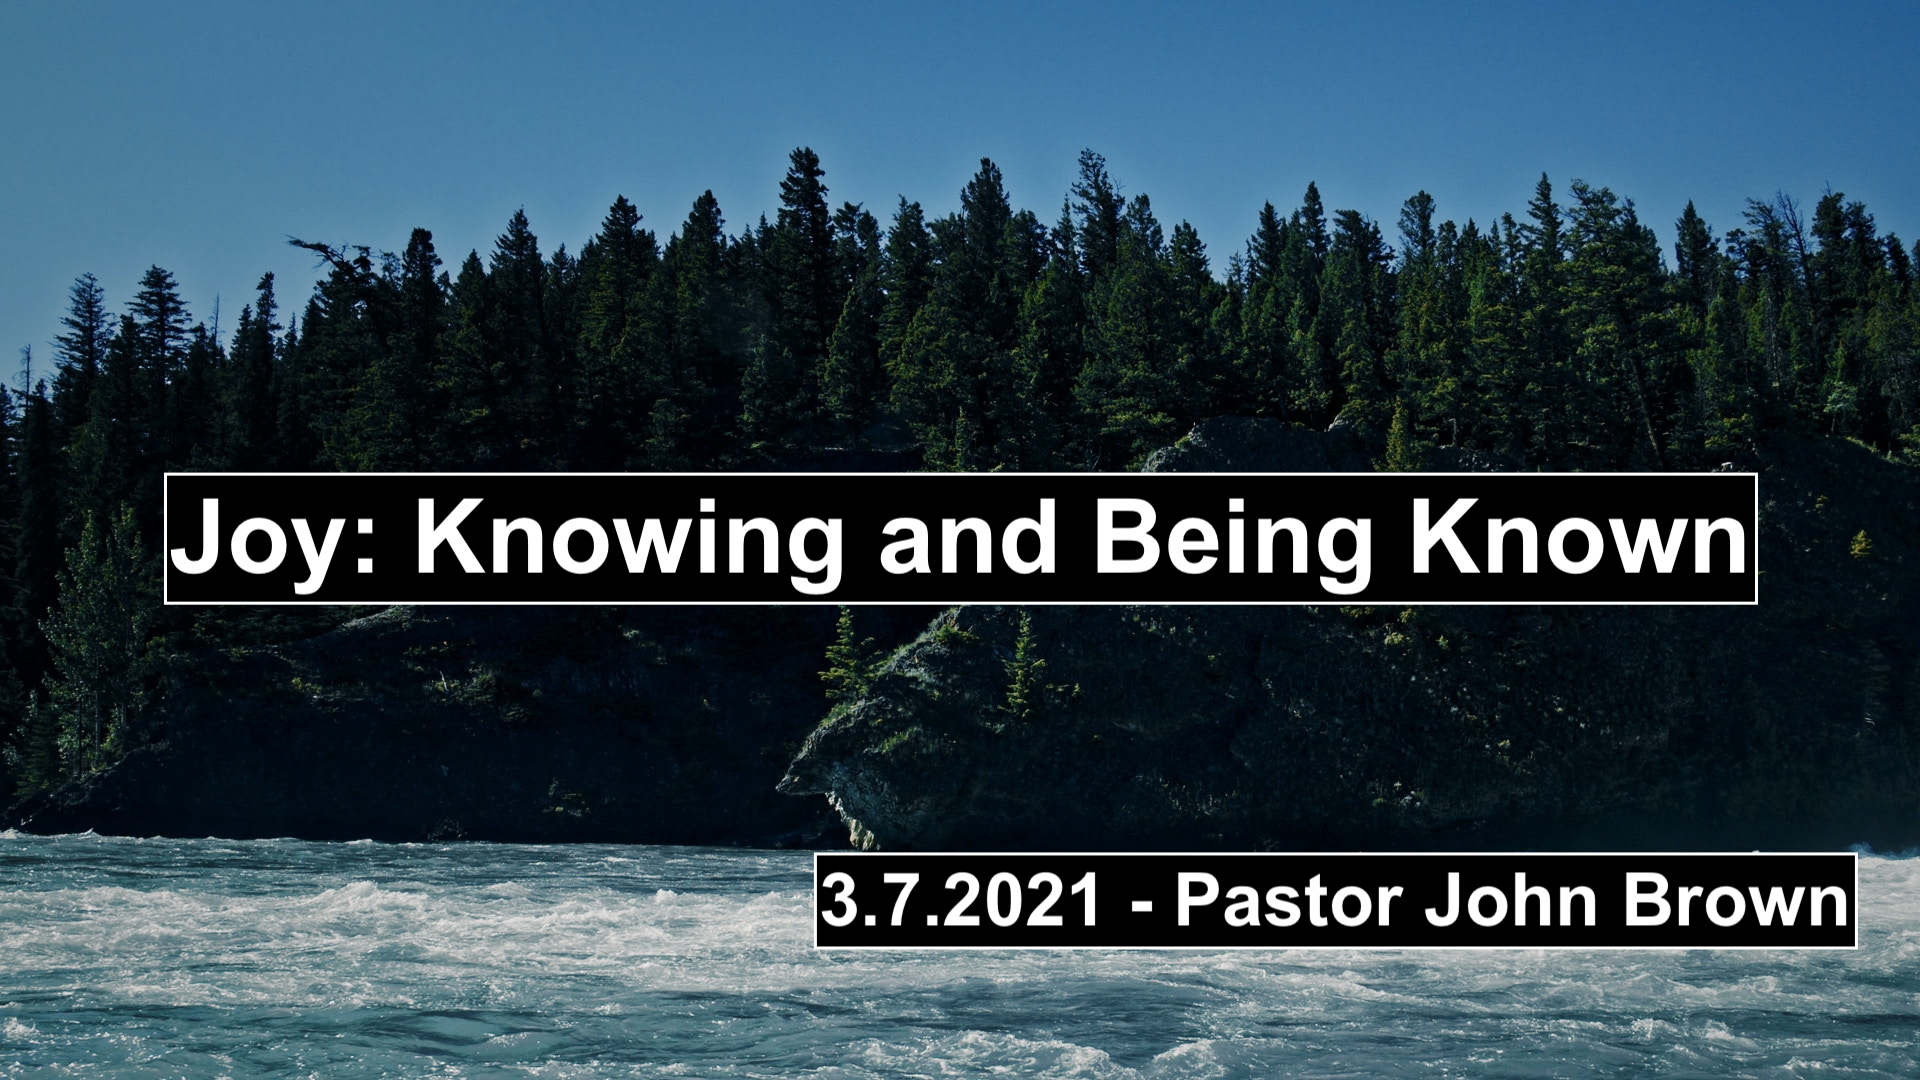 Joy:  Knowing and Being Known